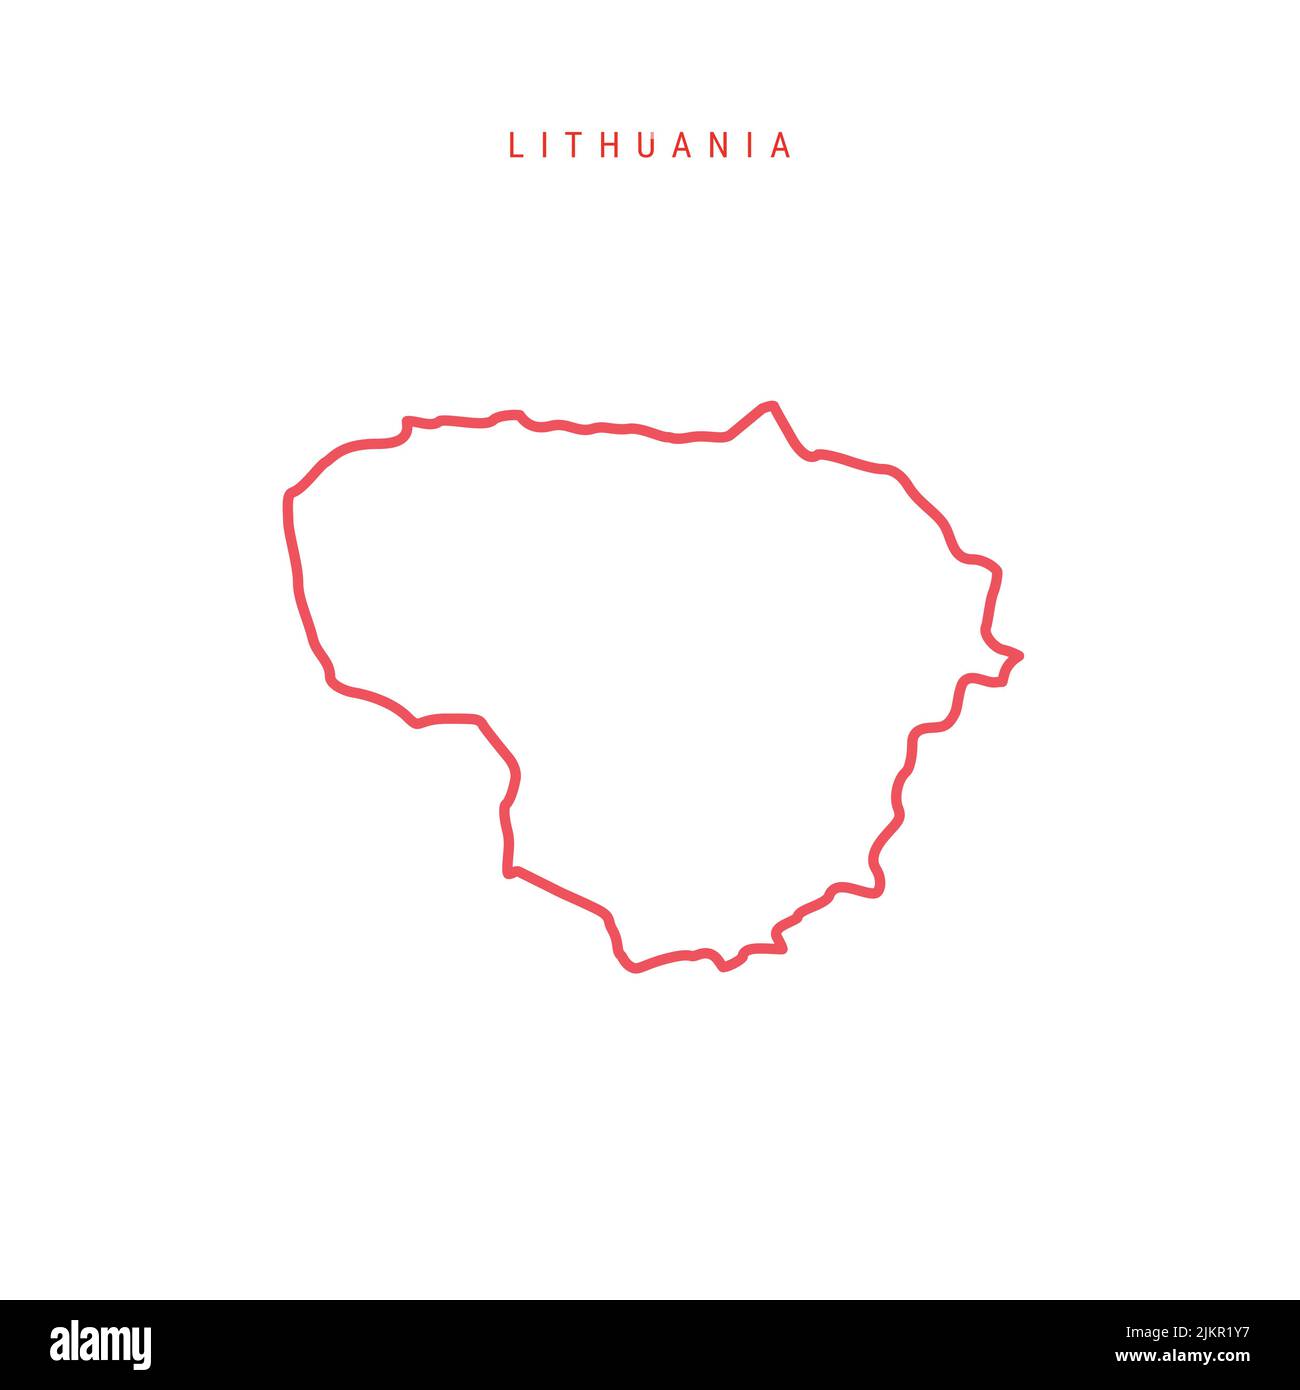 Lithuania editable outline map. Lithuanian red border. Country name. Adjust line weight. Change to any color. Vector illustration. Stock Vector